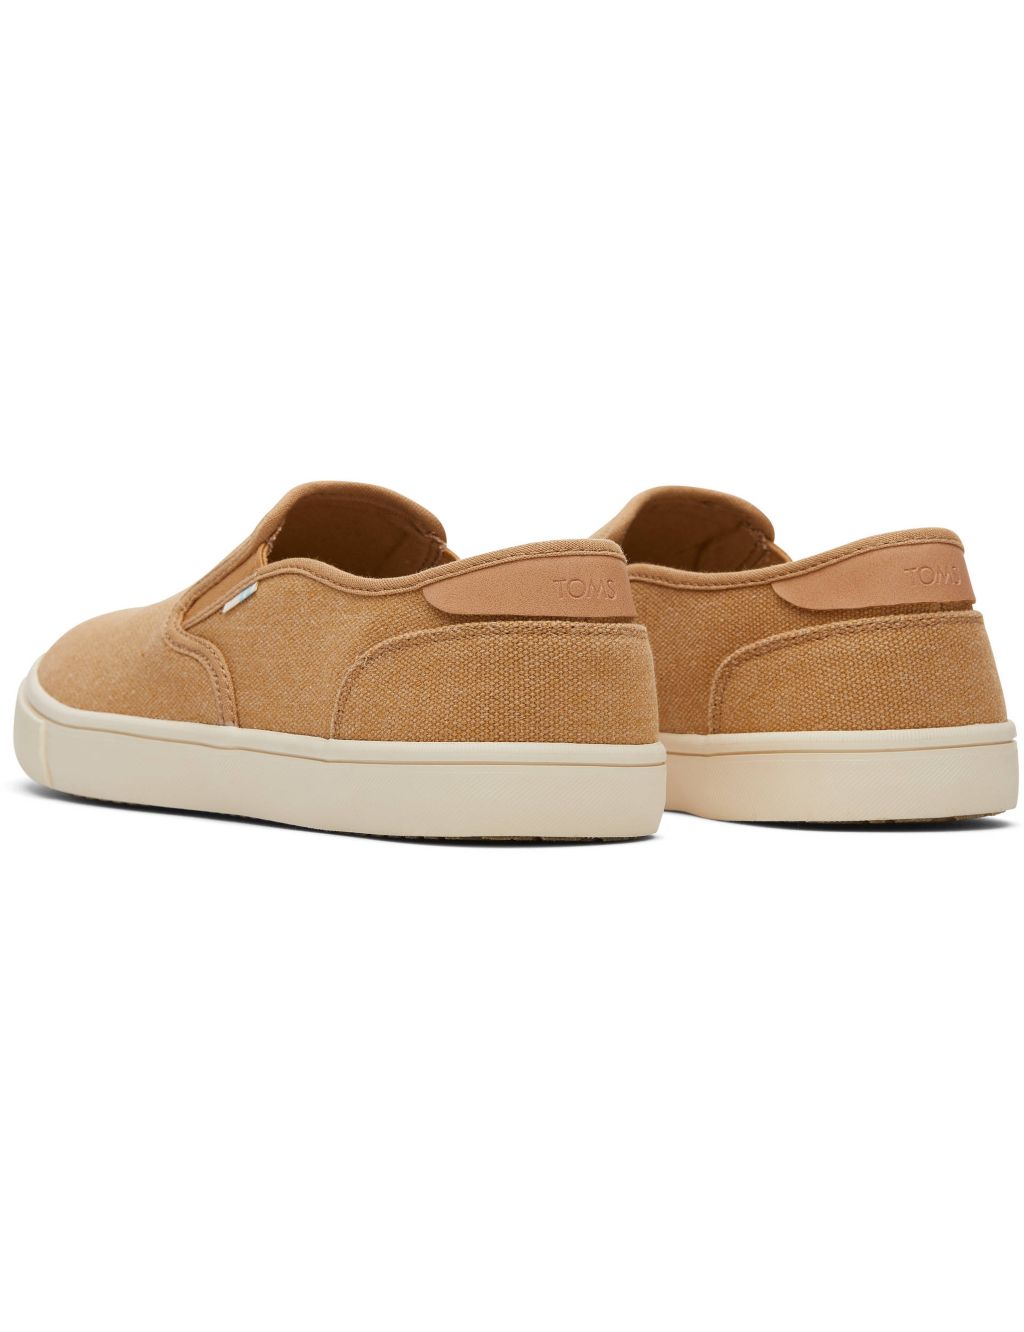 Canvas Slip-On Trainers image 4